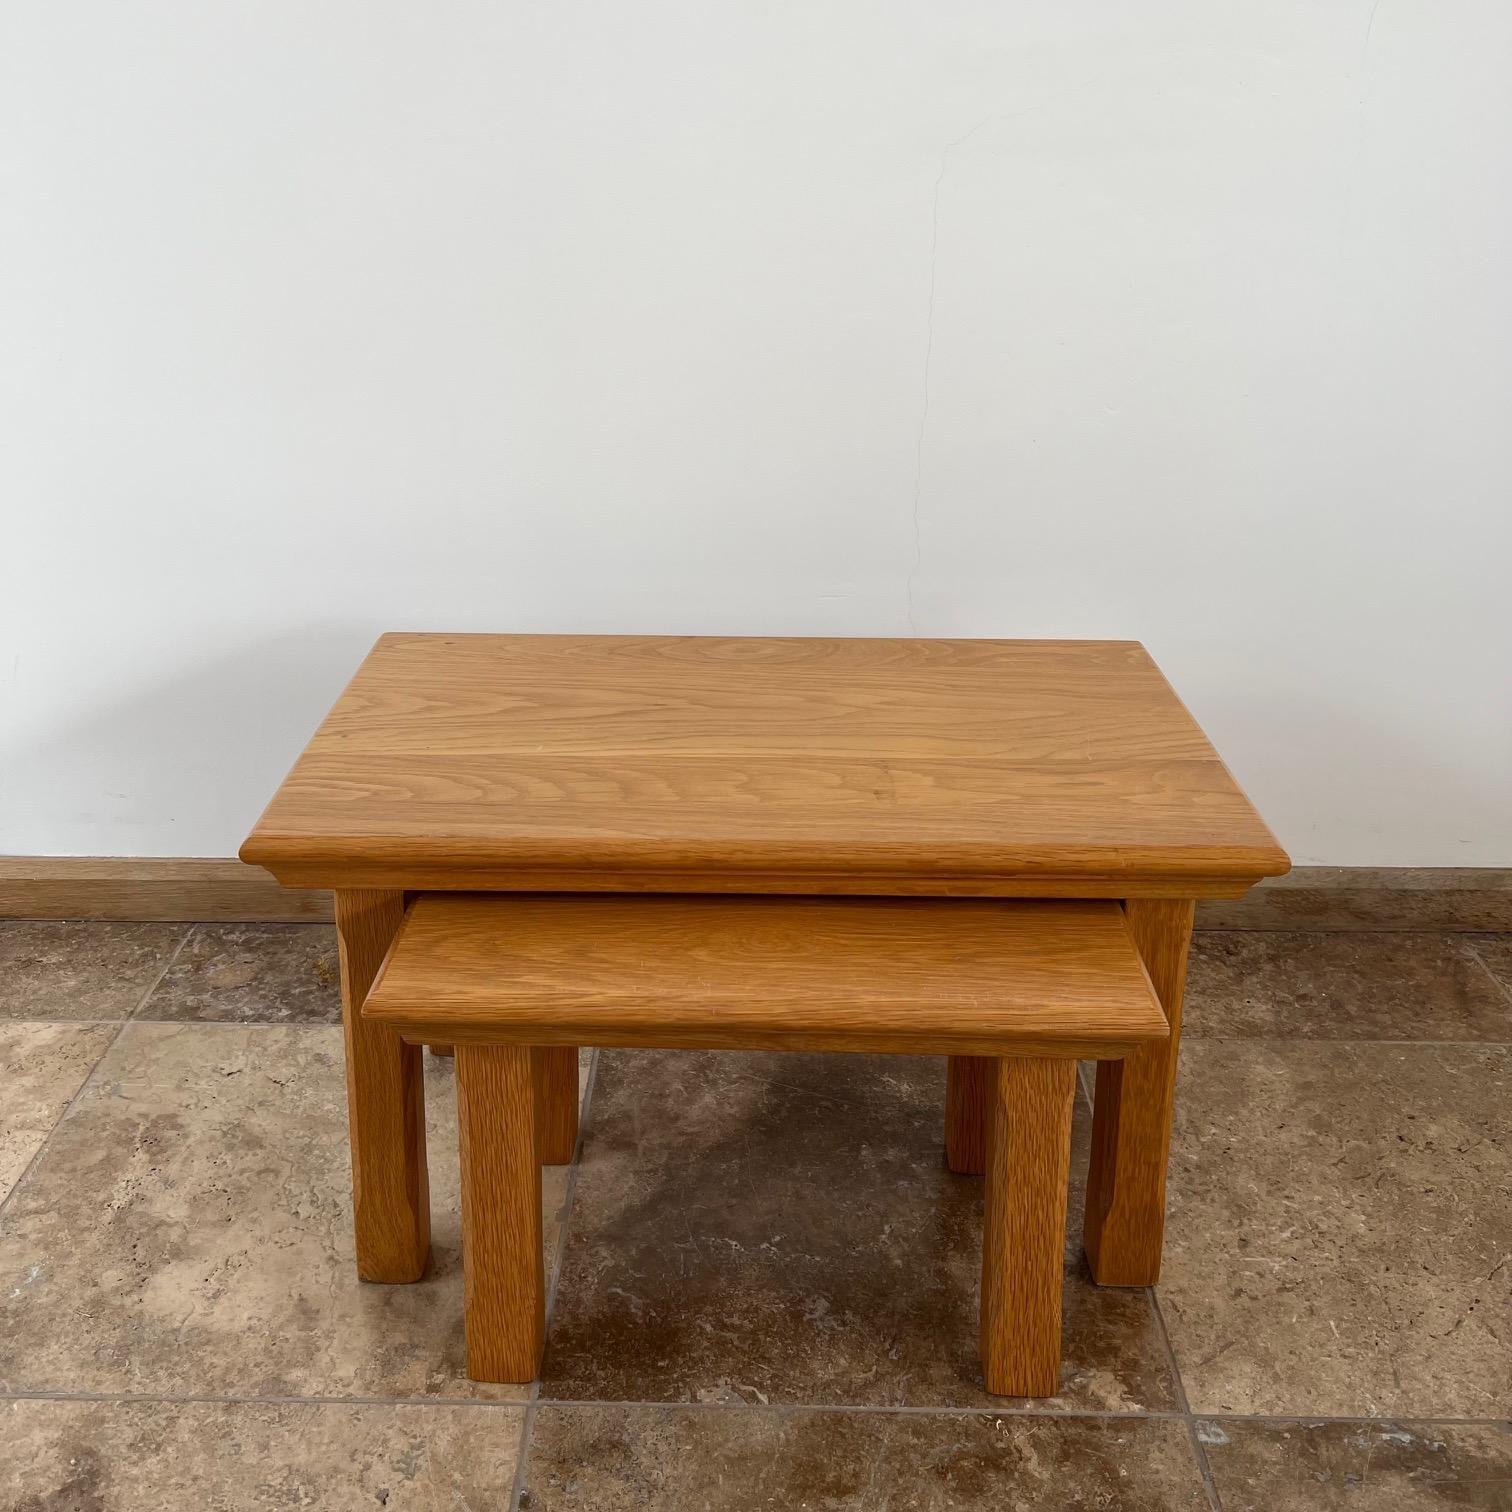 Two nesting tables. 

Holland, c1970s. 

Formed in oak. 

Useful side tables or as a nest. 

Smaller table is 30.5 H x 43 W x 31.5 D in cm. 

Location: London Gallery.

Dimensions: 35.5 H x 60 W x 36.5 D in cm.

Delivery: POA

 